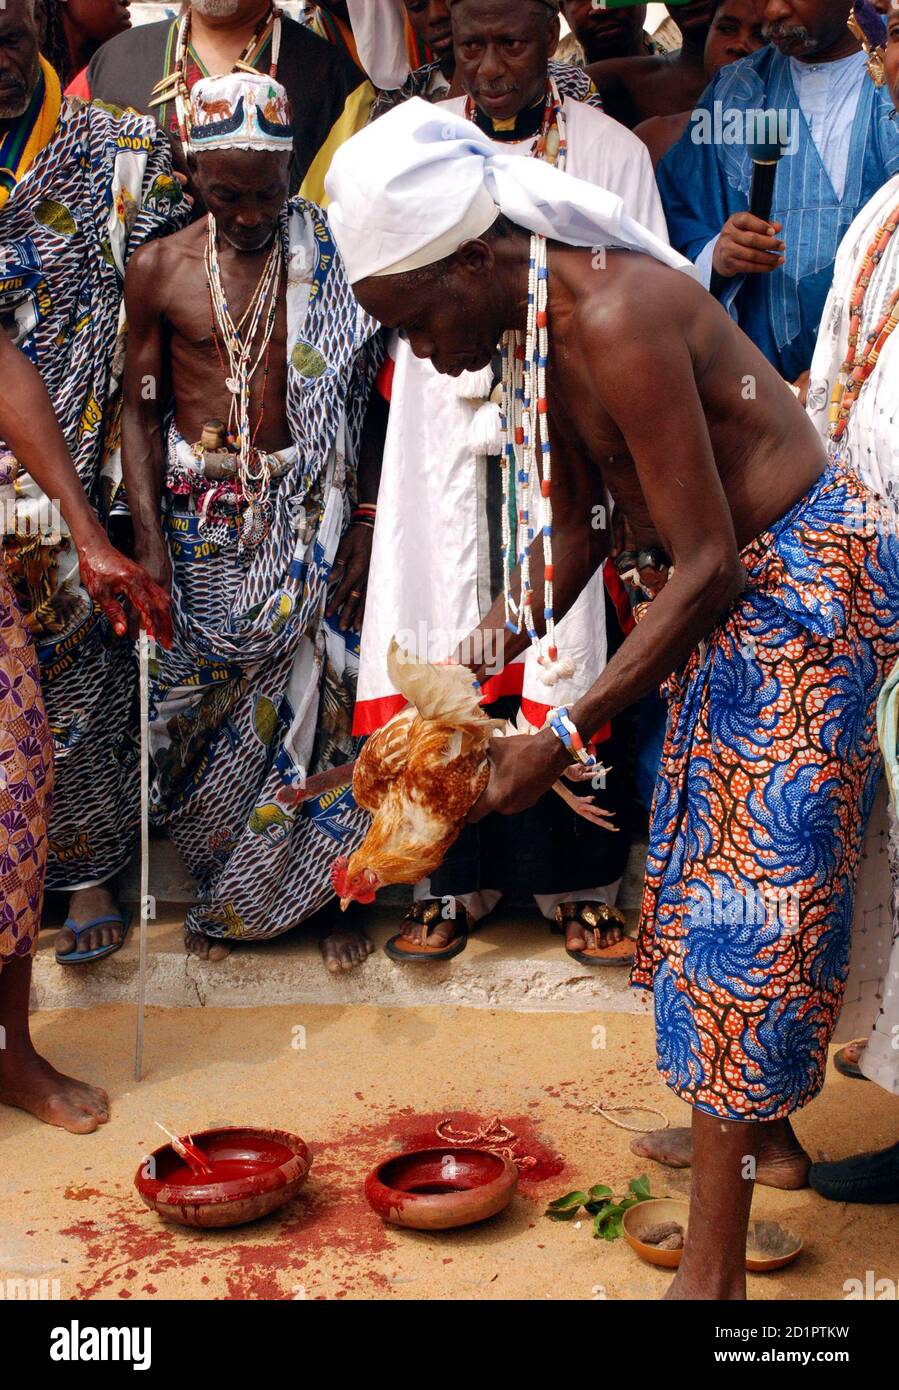 A voodoo practitioner prepares to sacrifice a chicken to collect the blood  in clay pots during a ceremony in Cotonou, December 19, 2007. Benin, the  home of ritual Voodoo sacrifice, became the